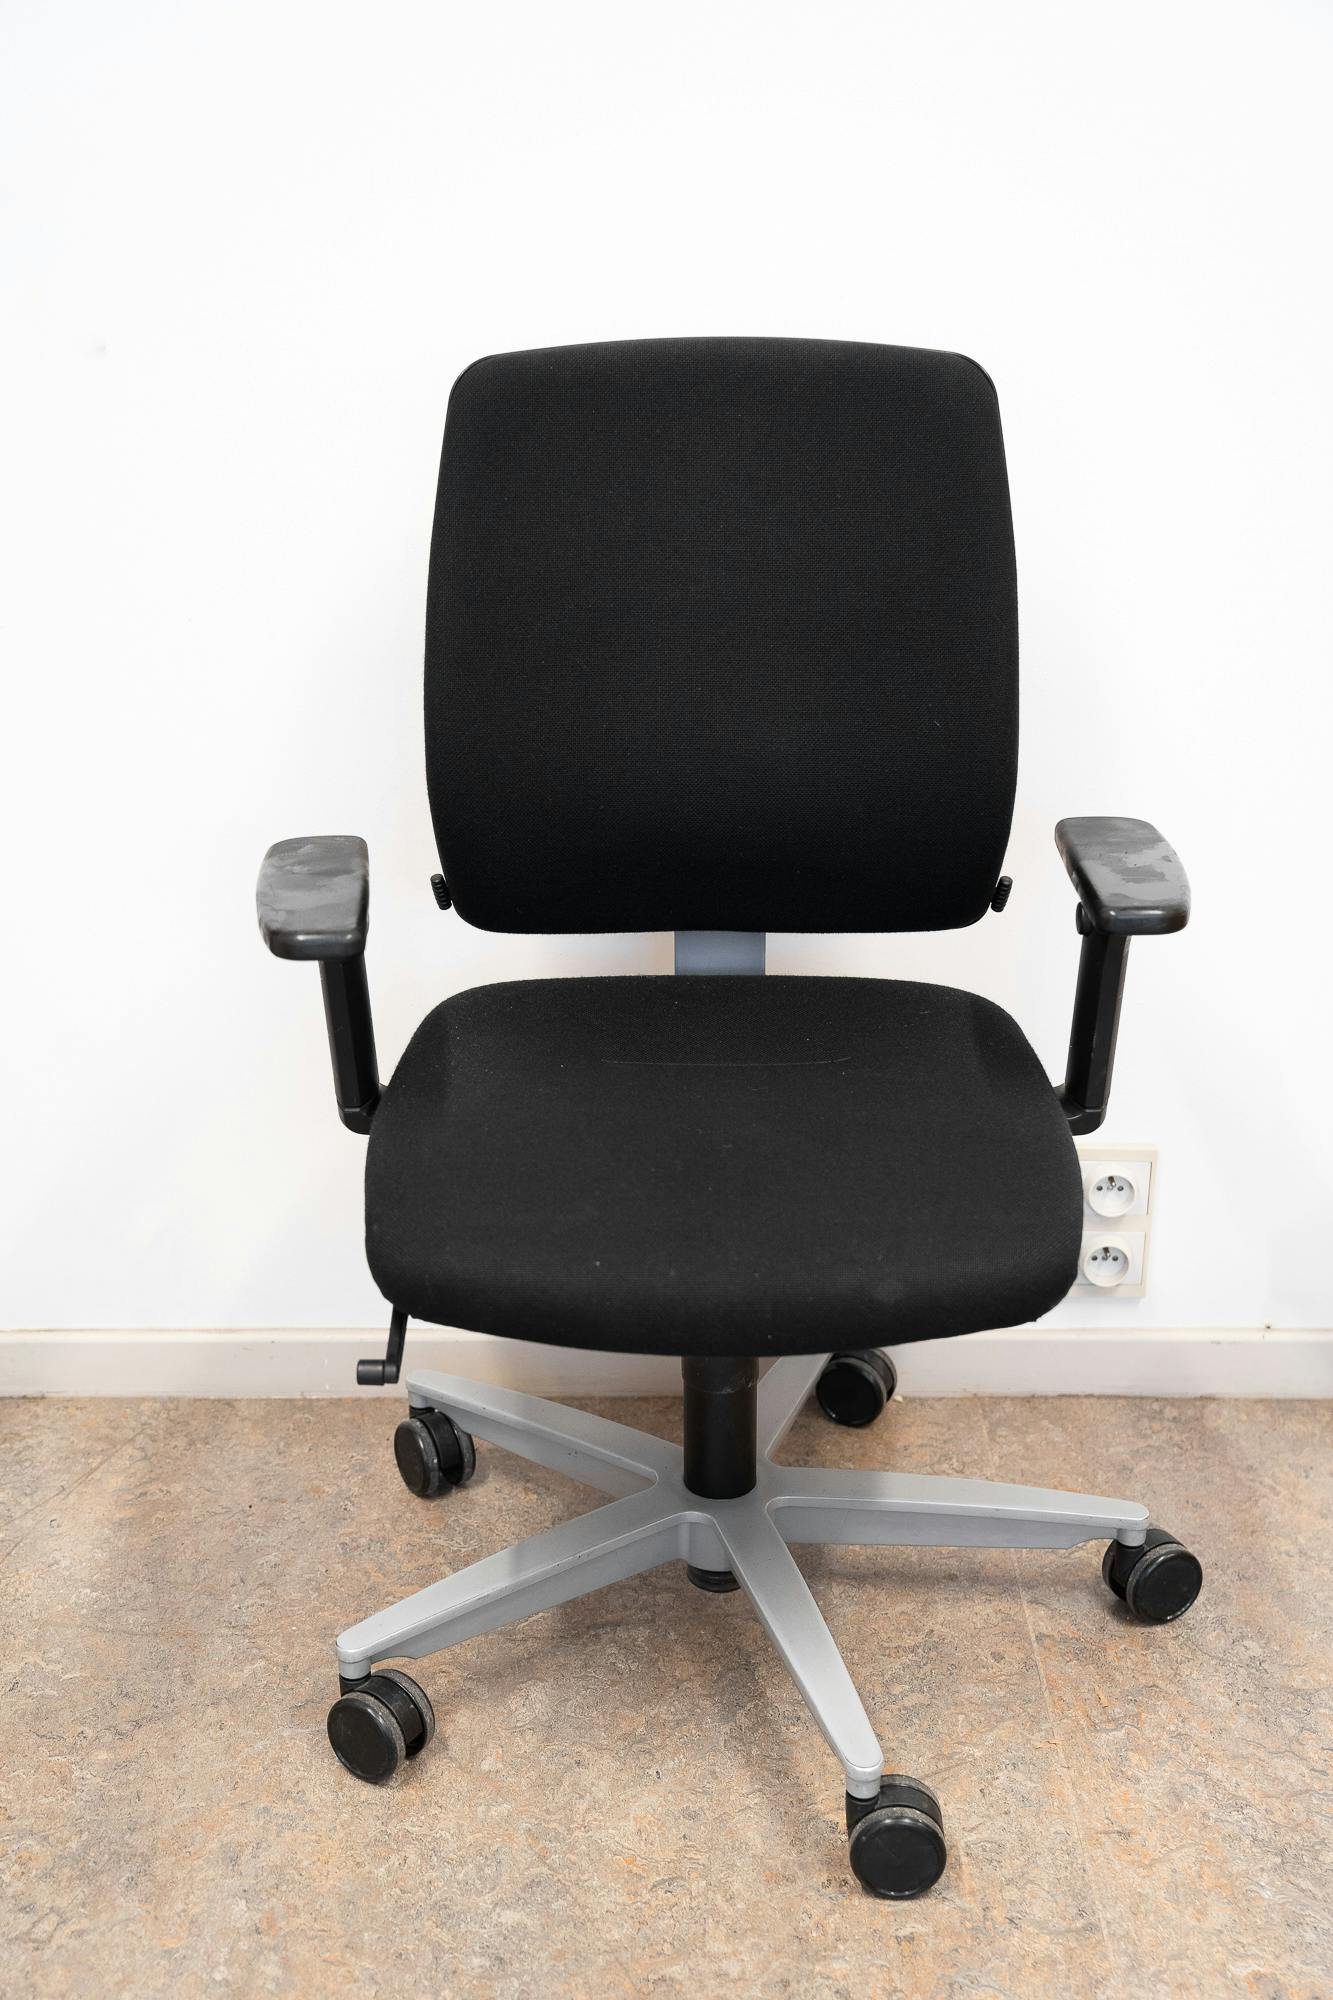 Sedus black office chair with castors - Second hand quality "Office chairs" - Relieve Furniture